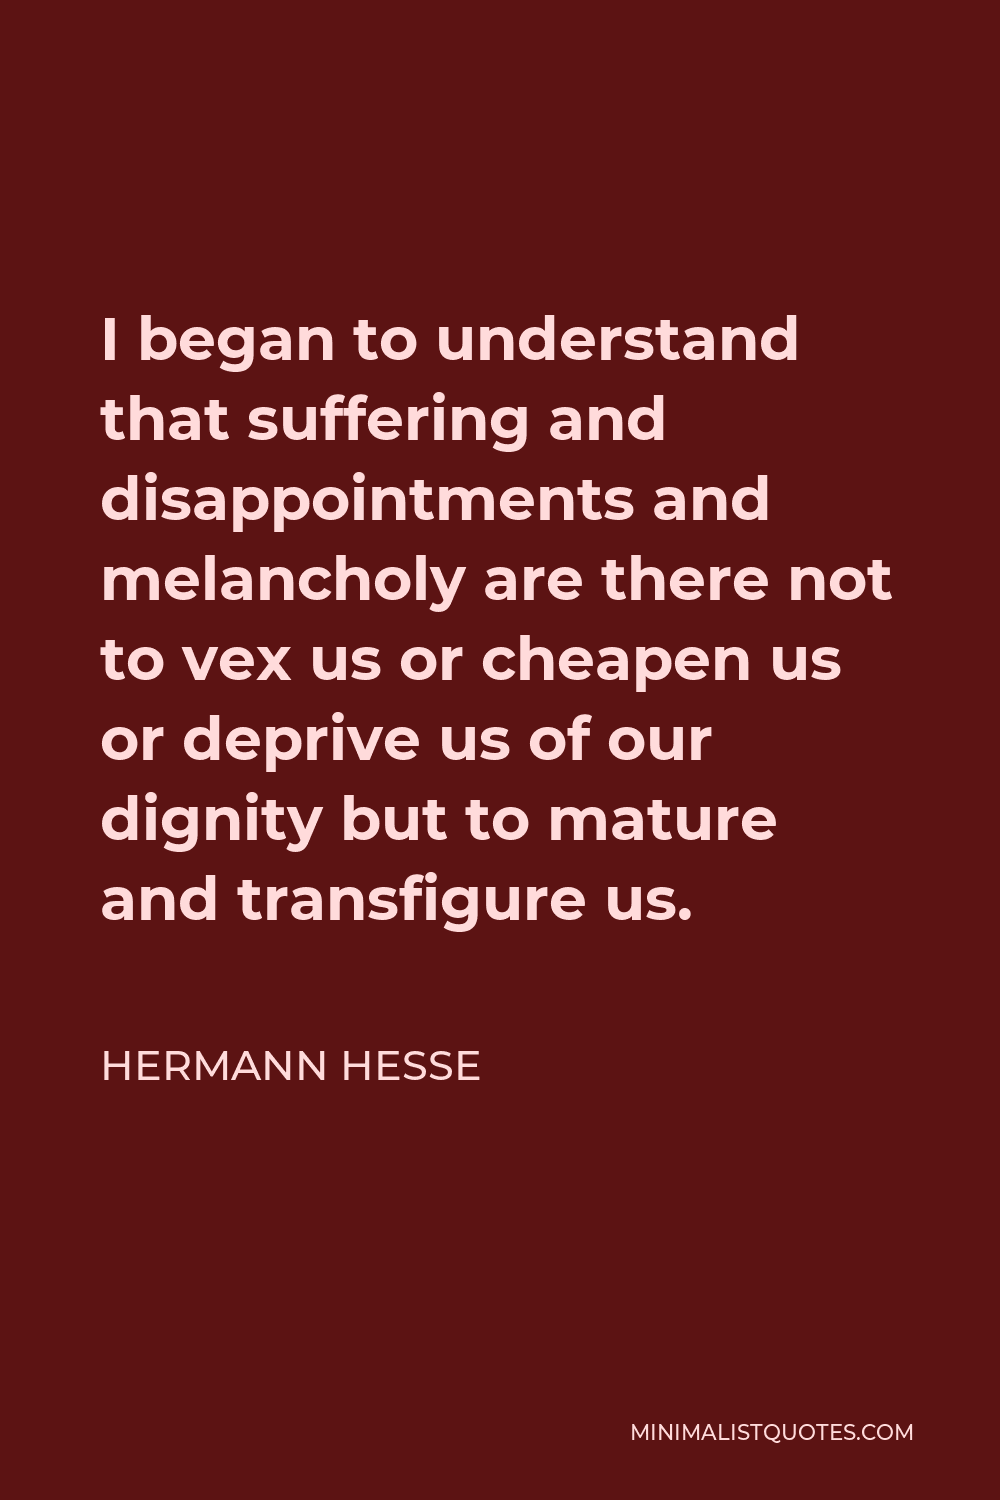 Hermann Hesse Quote - I began to understand that suffering and disappointments and melancholy are there not to vex us or cheapen us or deprive us of our dignity but to mature and transfigure us.